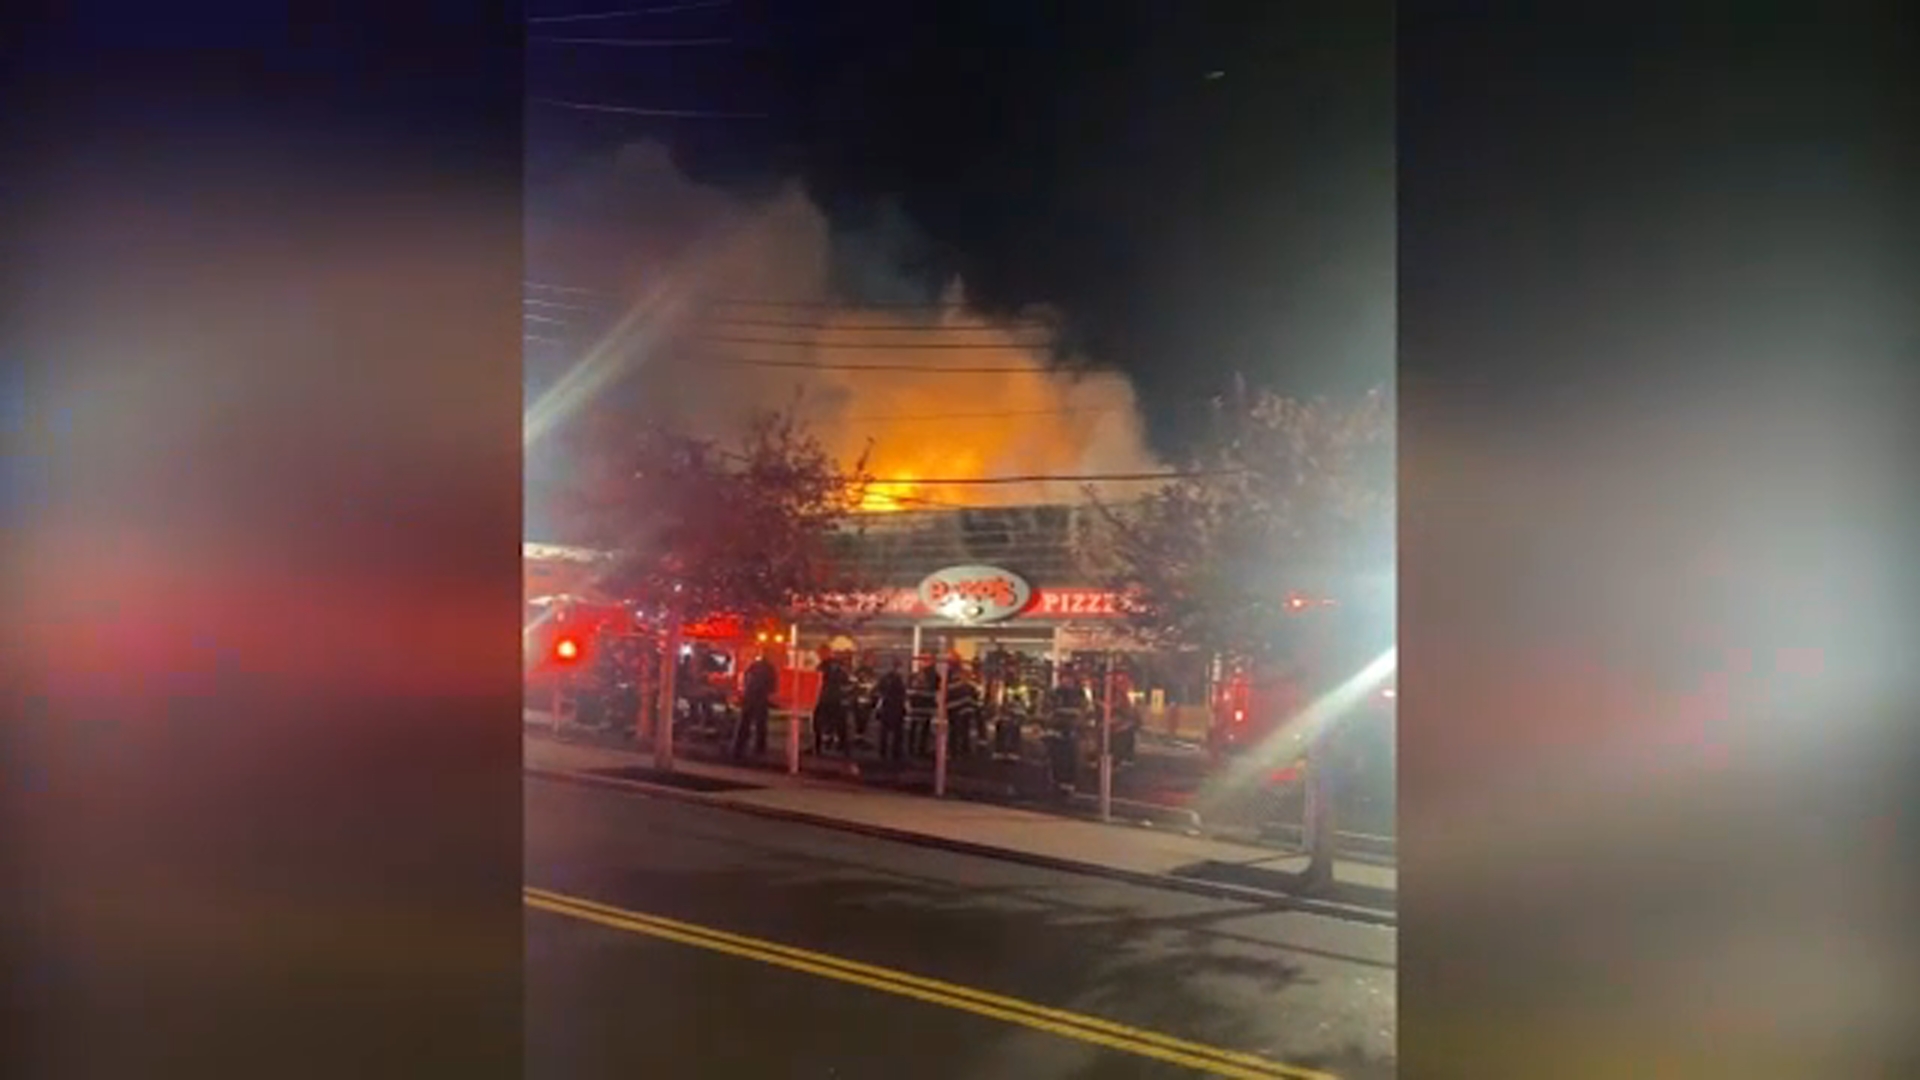 Fire destroys row of Staten Island businesses, 1 firefighter injured